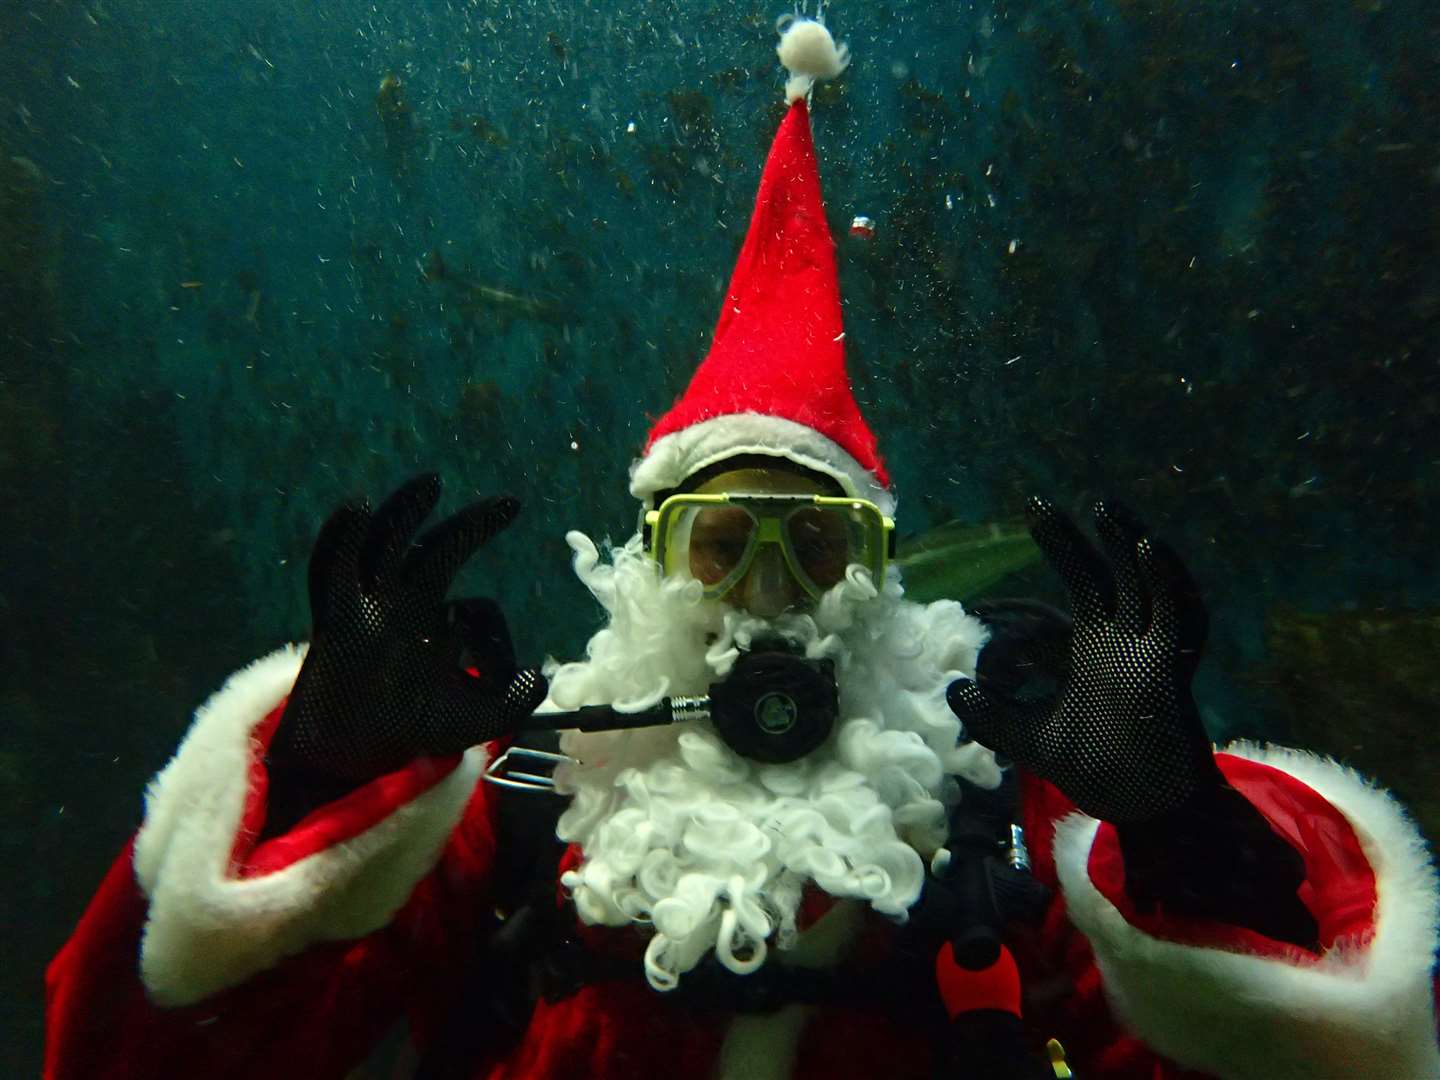 Scuba Santa is going swimming with the fish.